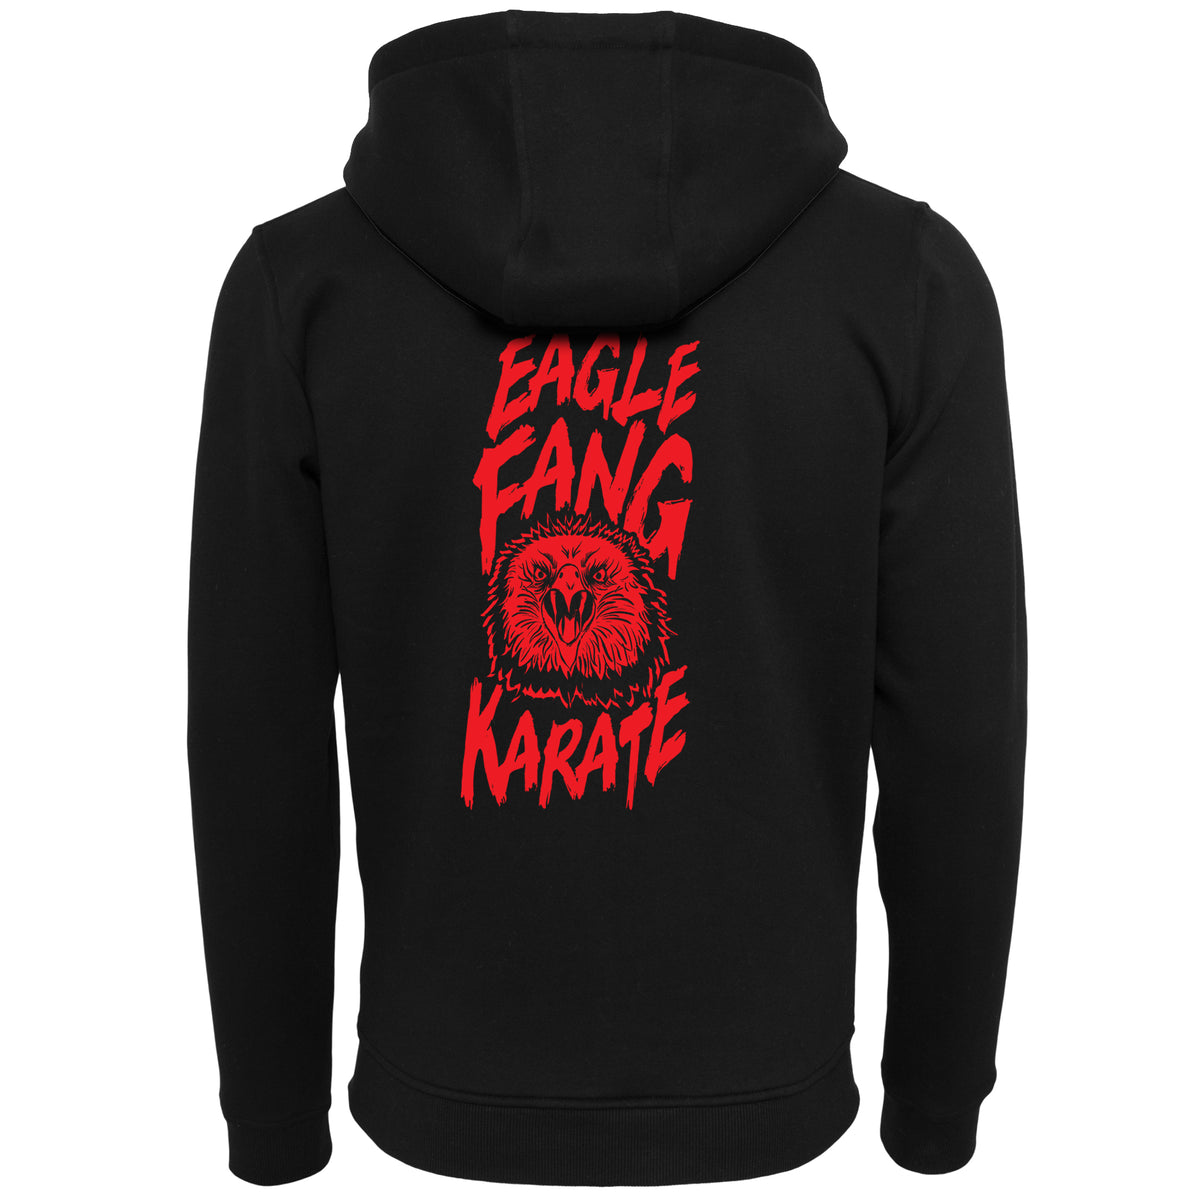 Eagle Fang Claw Marks Black Unisex Hoodie